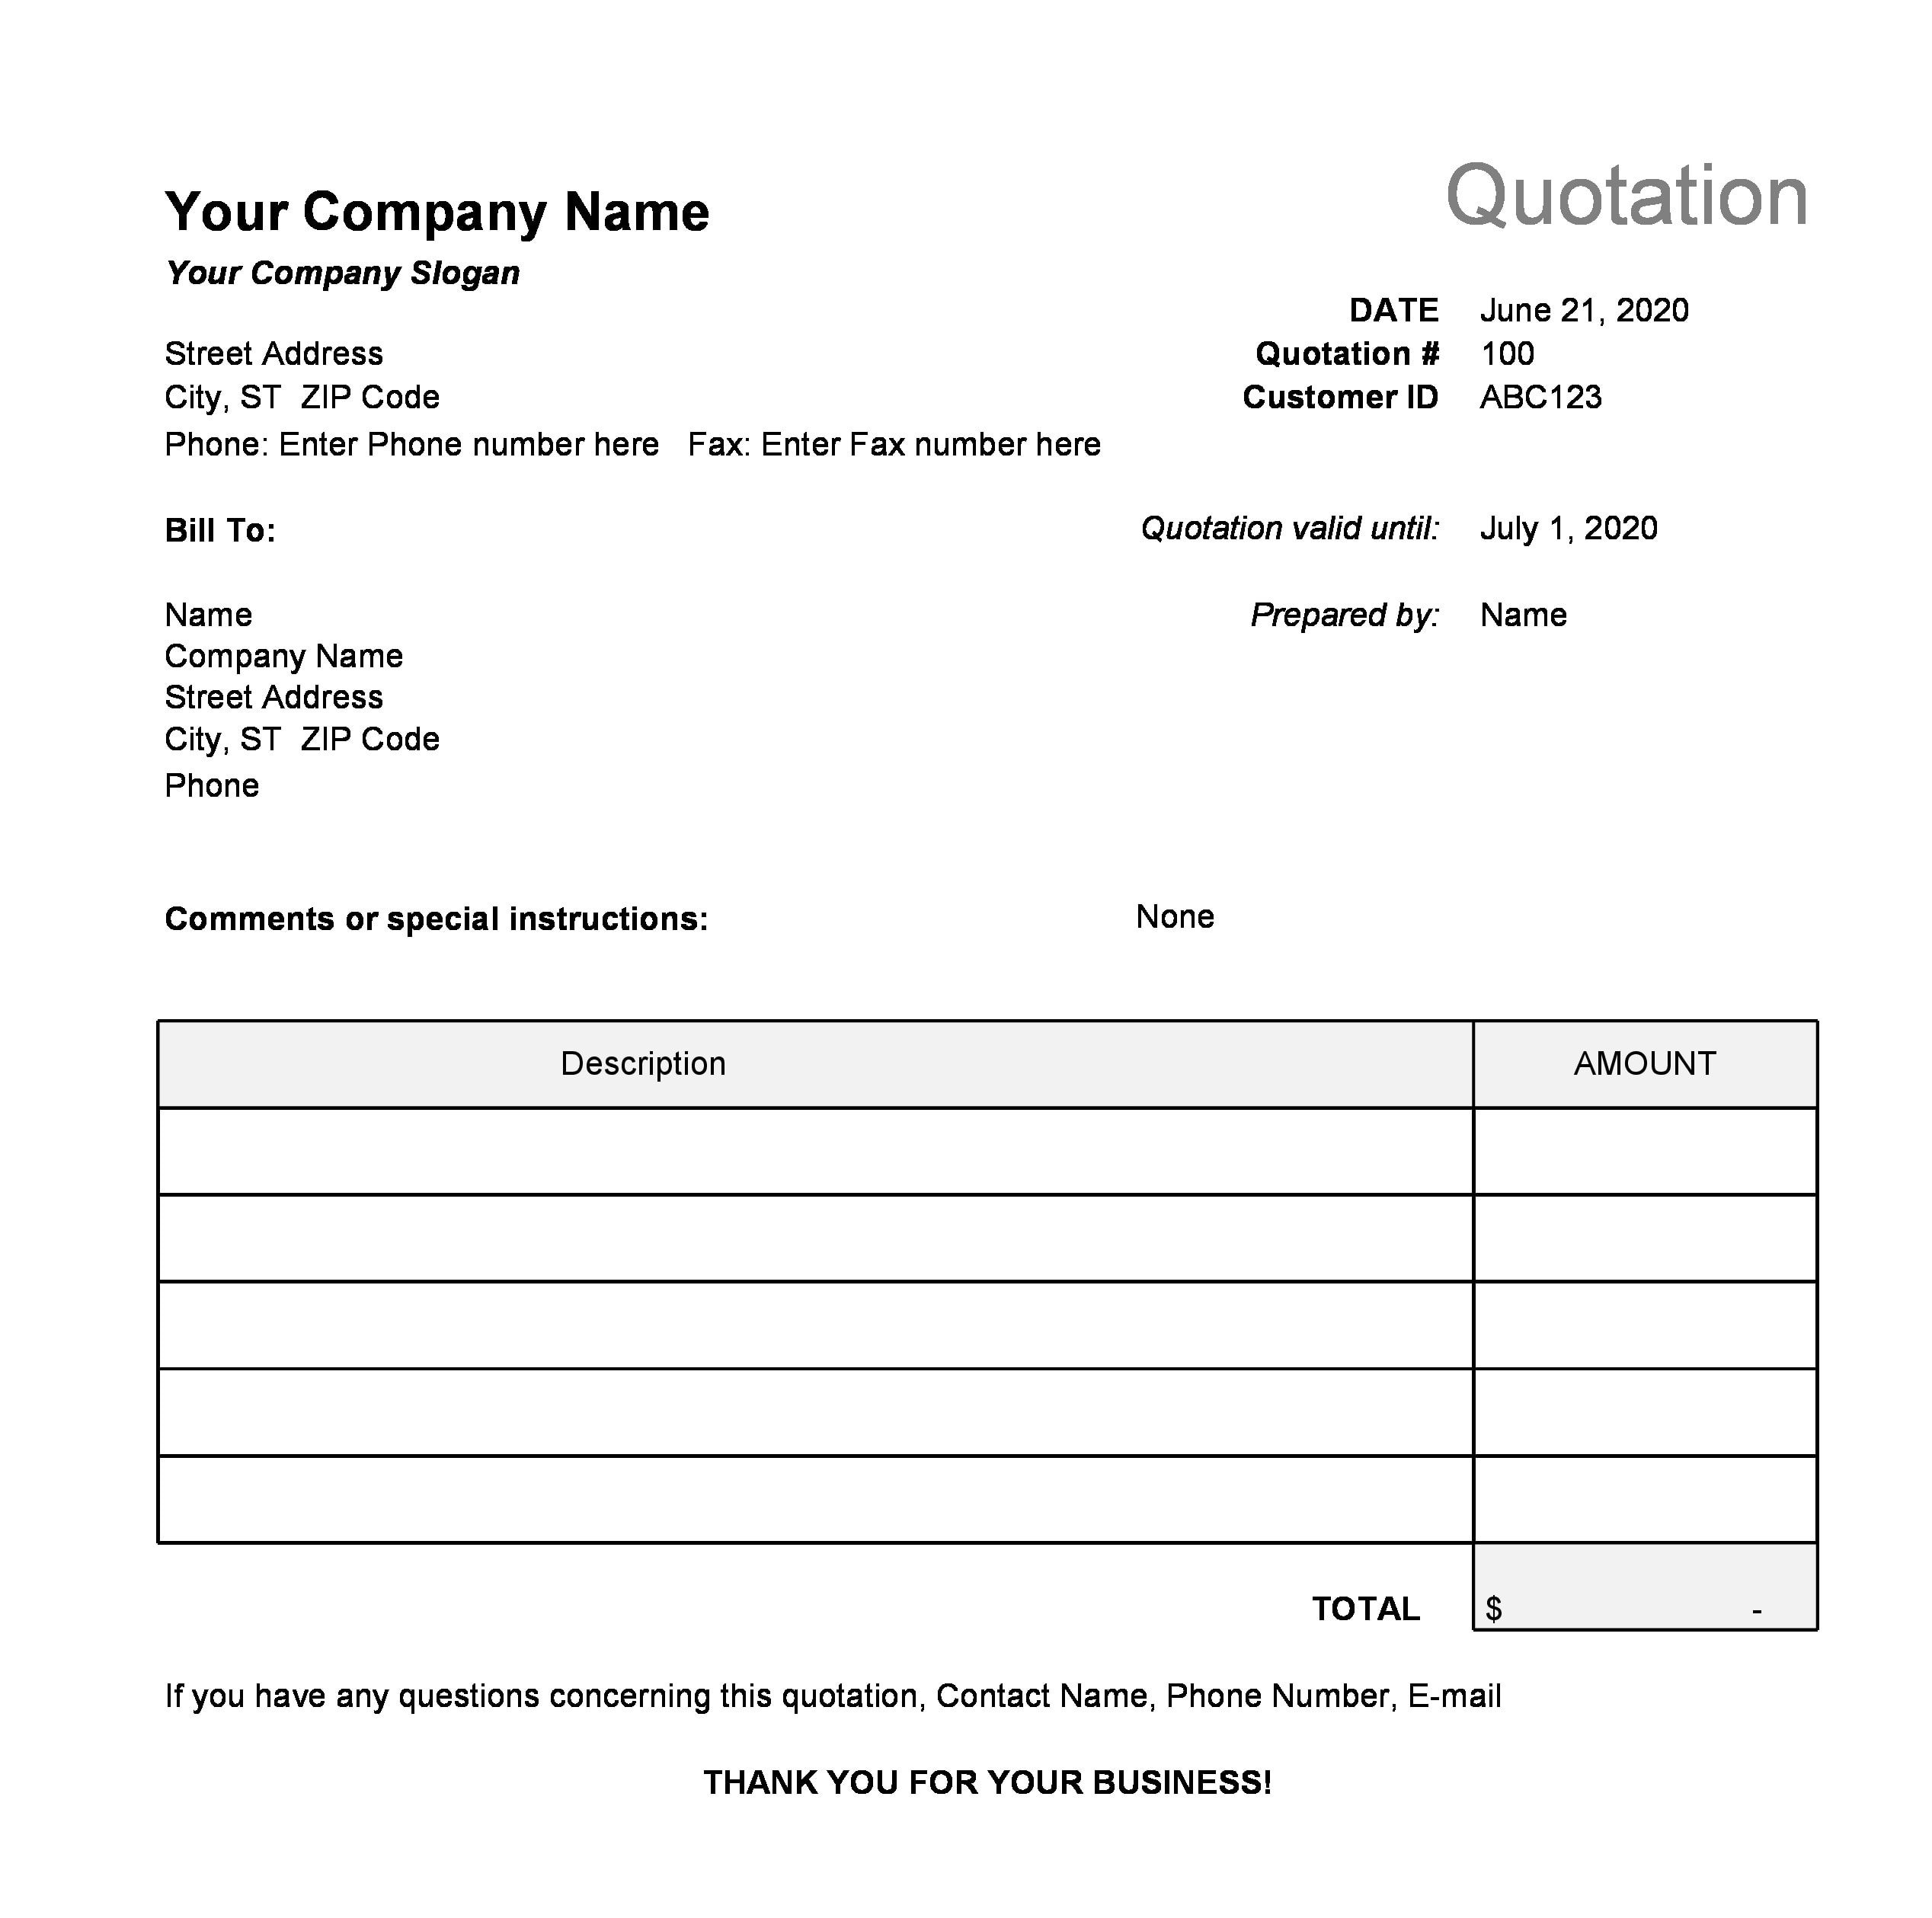 Printable Form For Quote Printable Forms Free Online